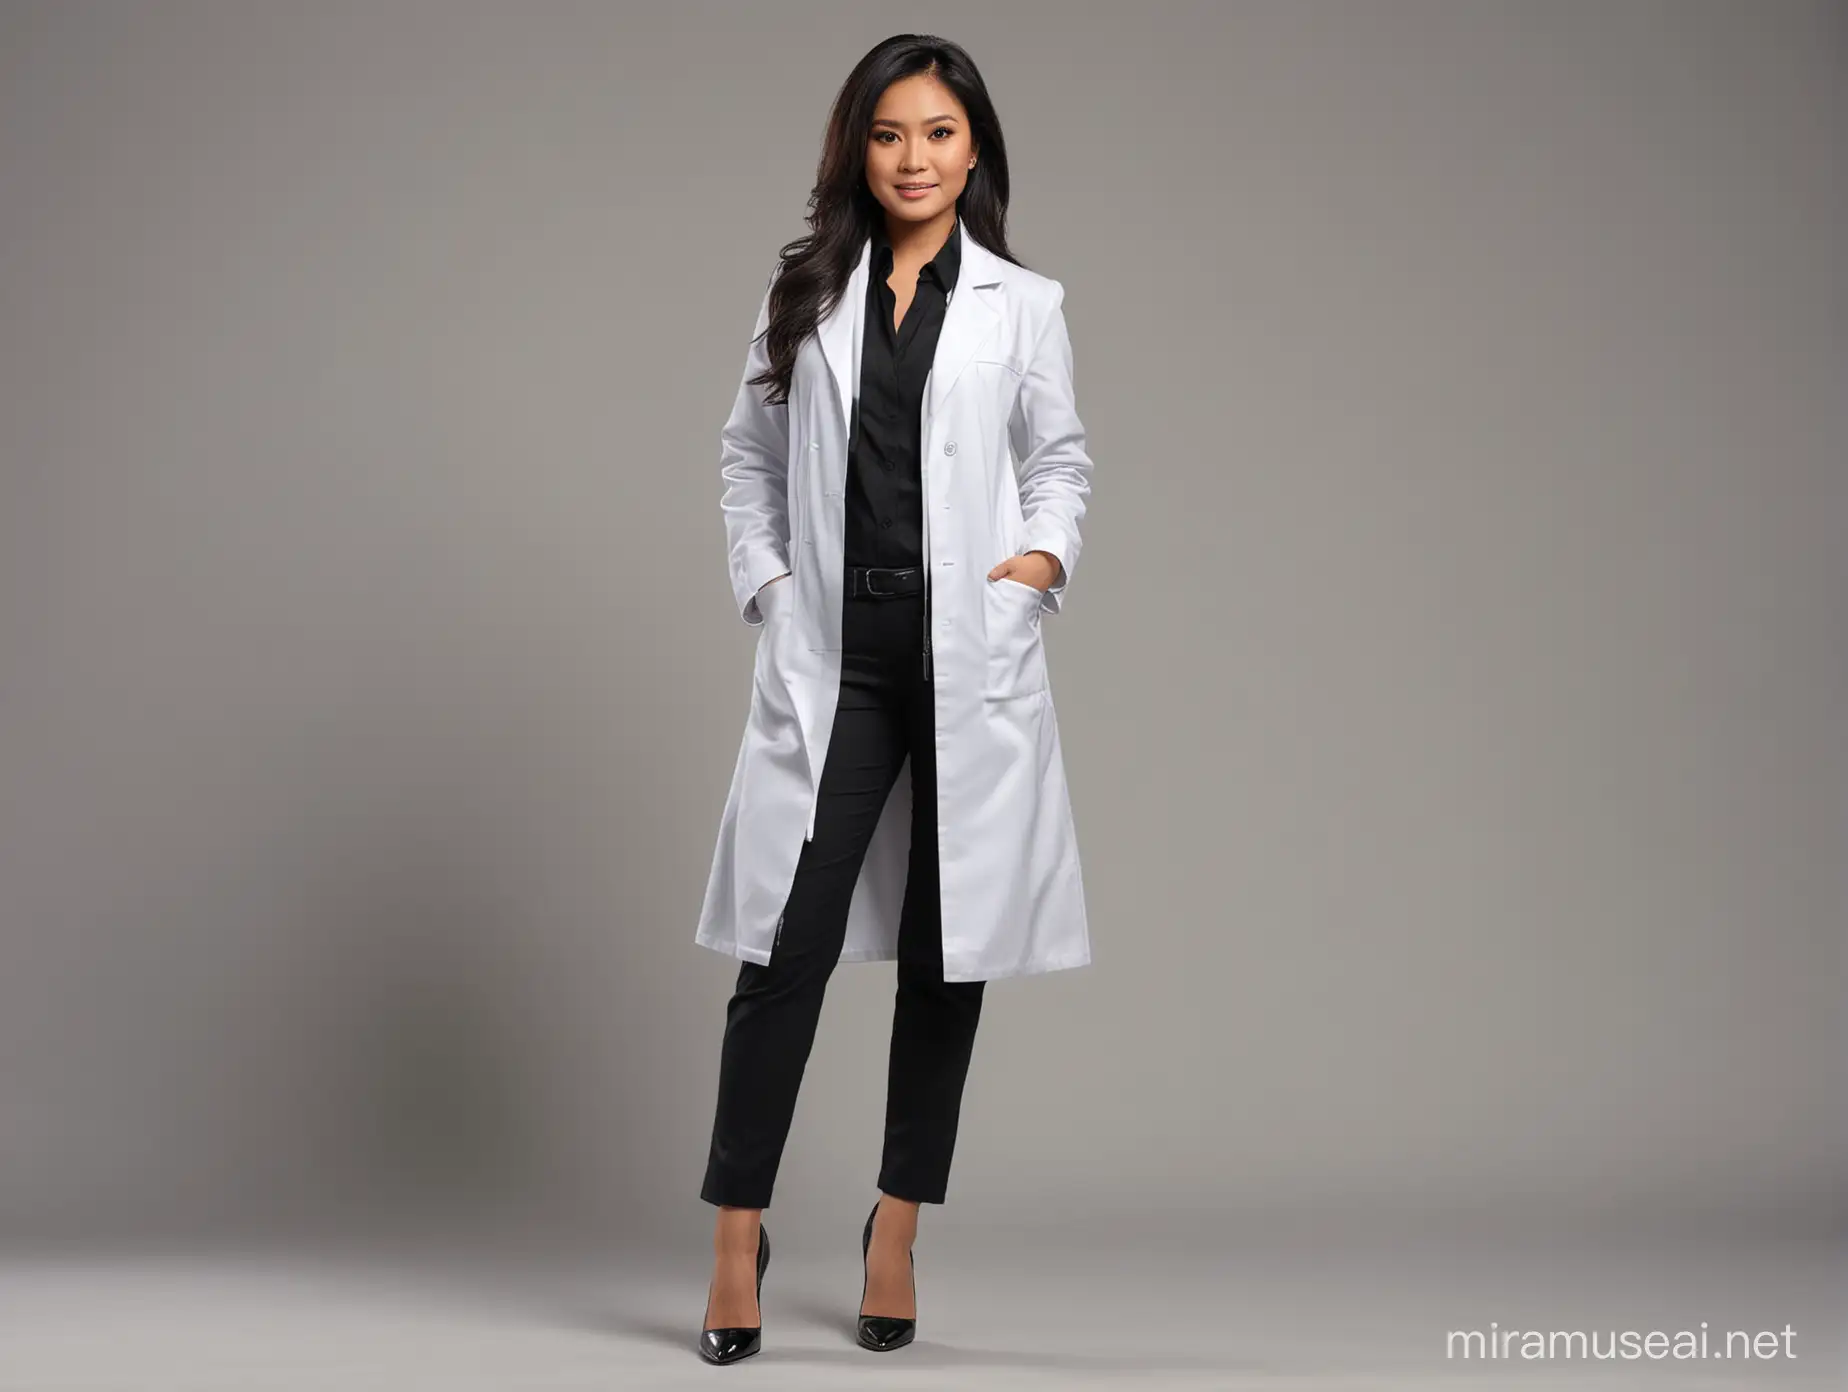 Indonesian Female Doctor in Professional Attire on Studio Background